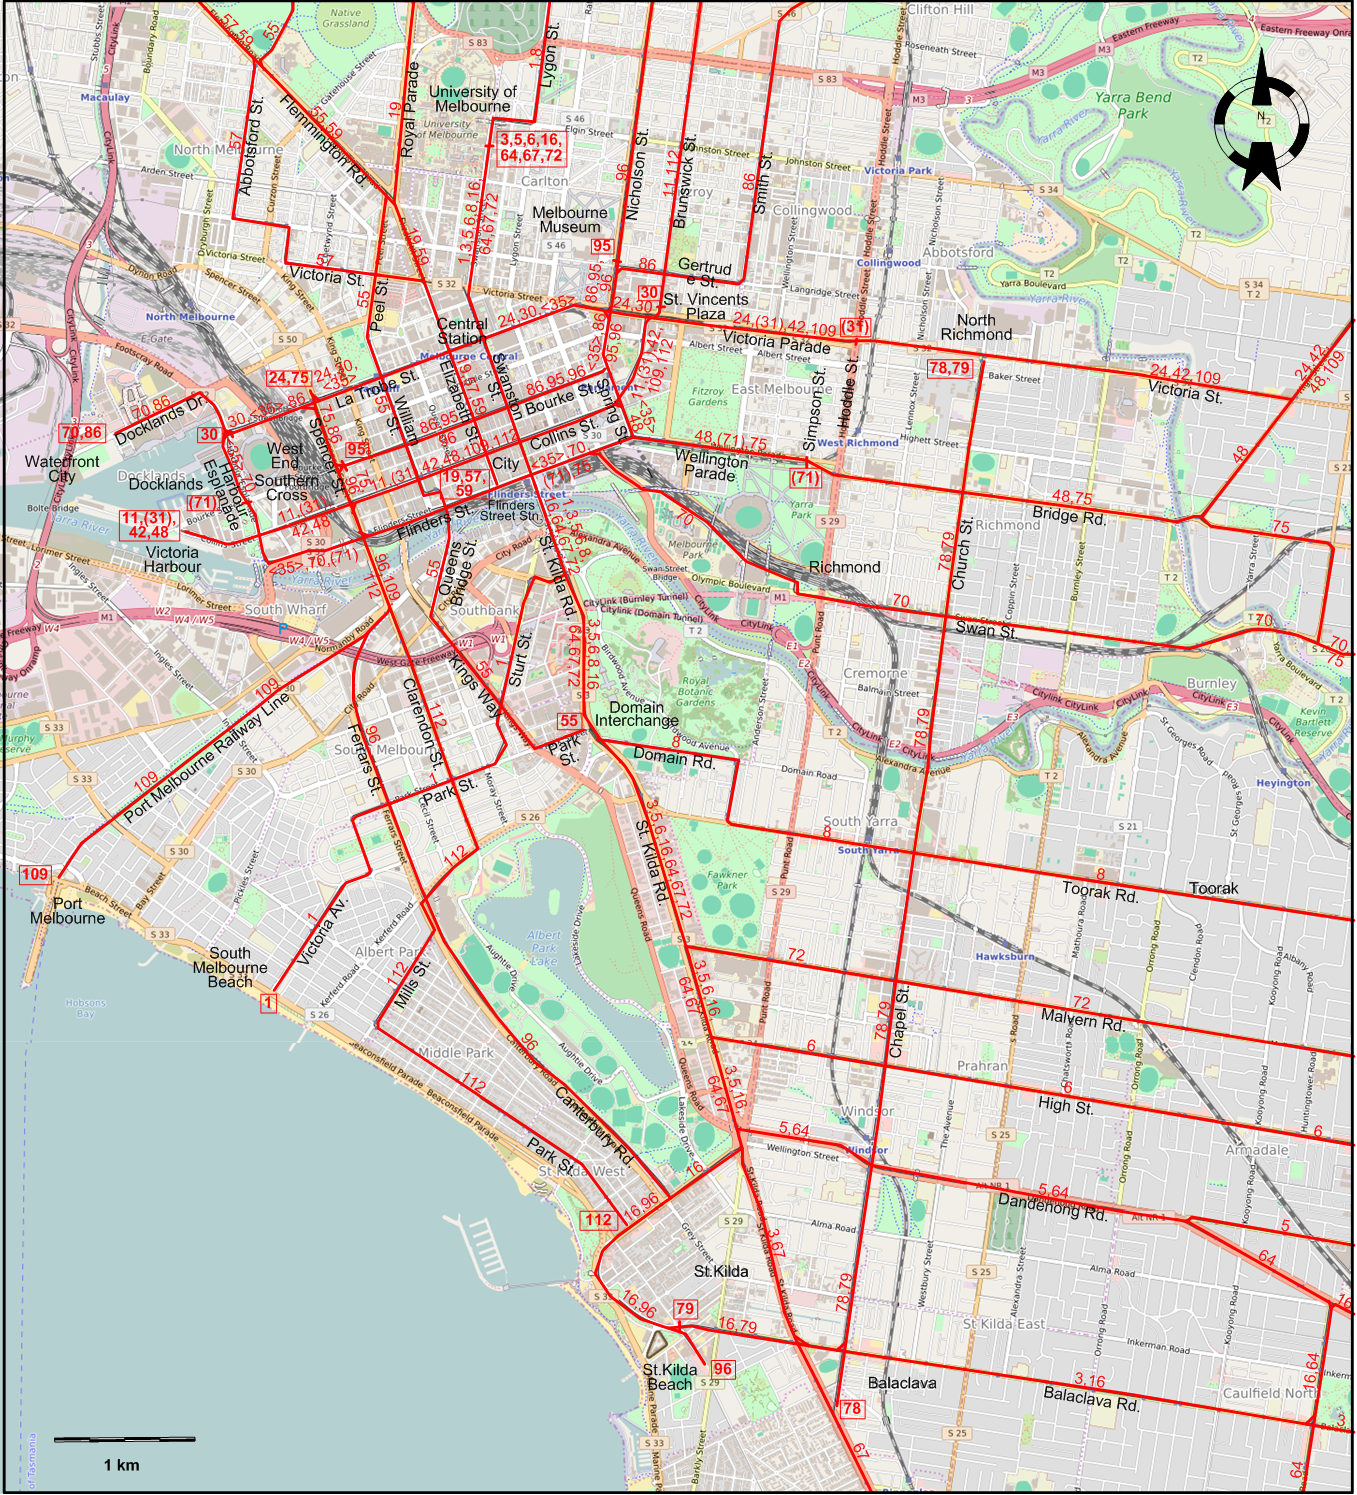 Melbourne-2010 downtown tram map